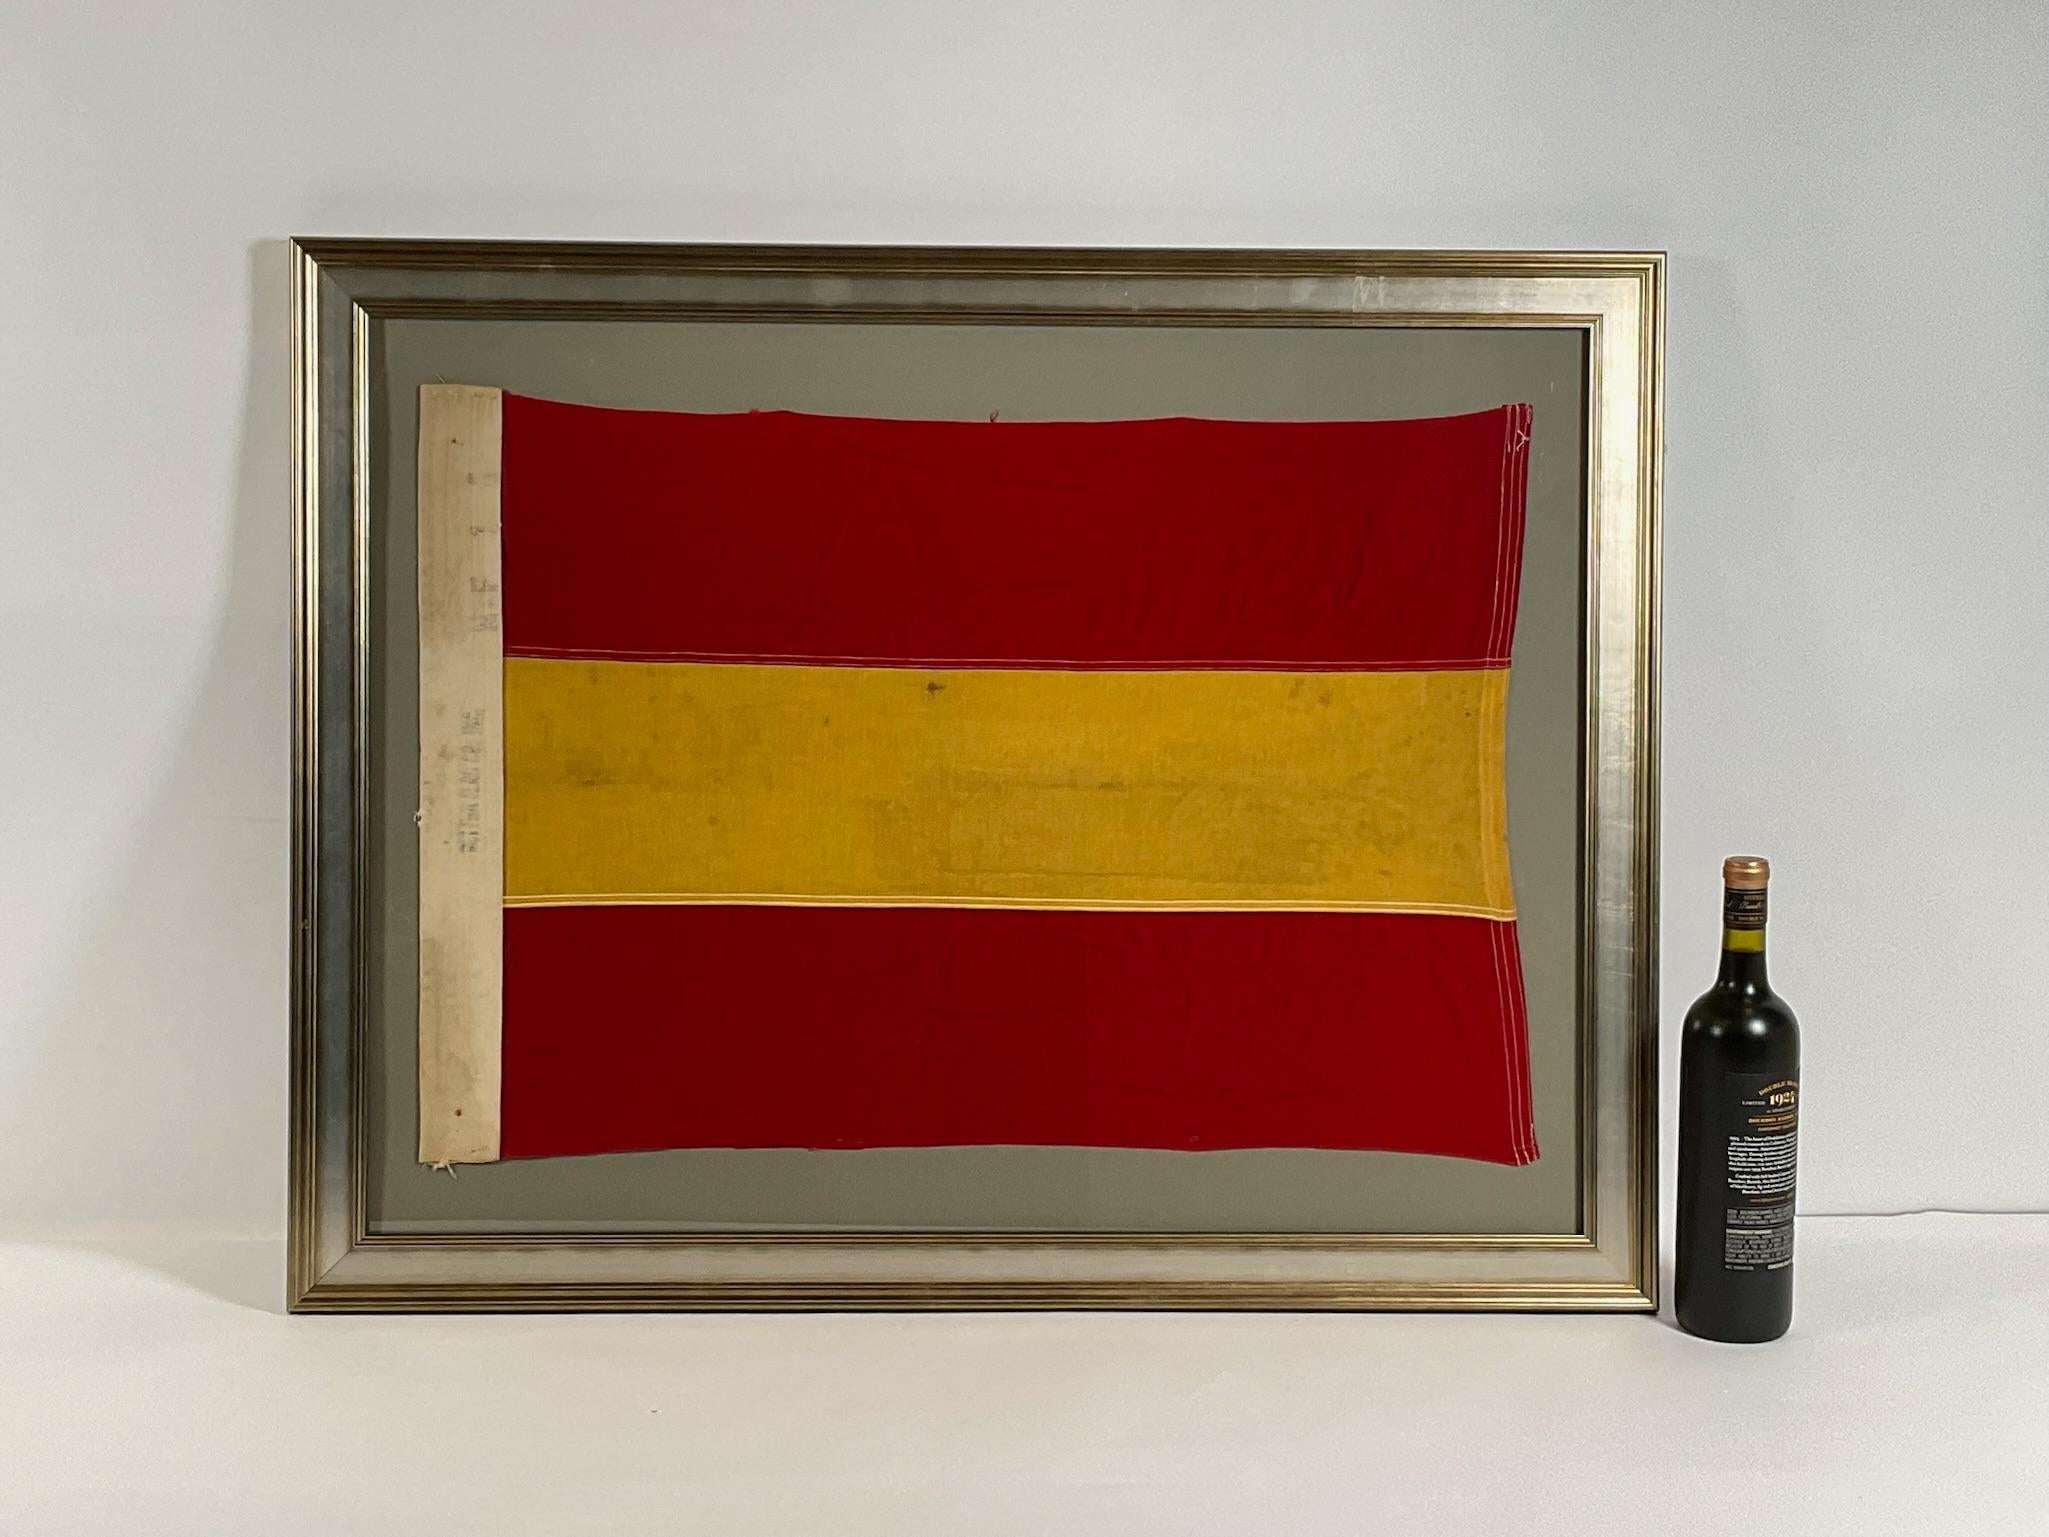 Linen maritime flag with sturdy canvas hoist and stitched panels of yellow and red. The hoist is stamped Dettra Flag Company Incorporated. This is a US Navy signal for number ONE, signal code